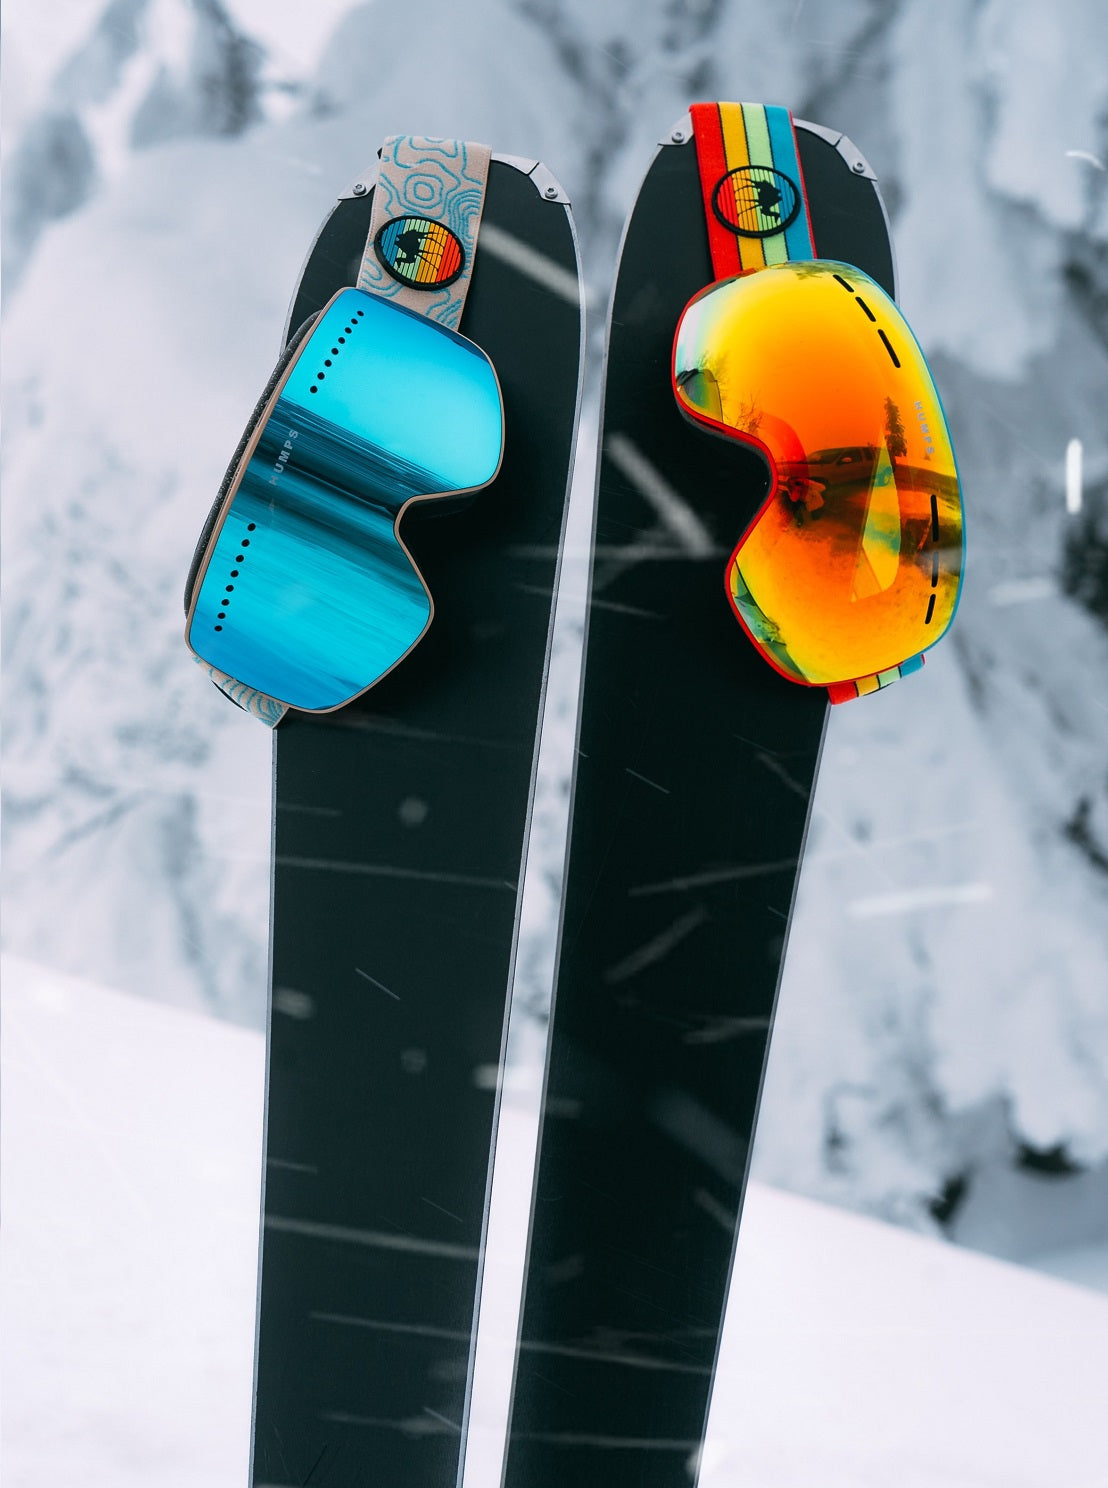 Get ready for your ski trip with the right equipment for extra warmth and comfort